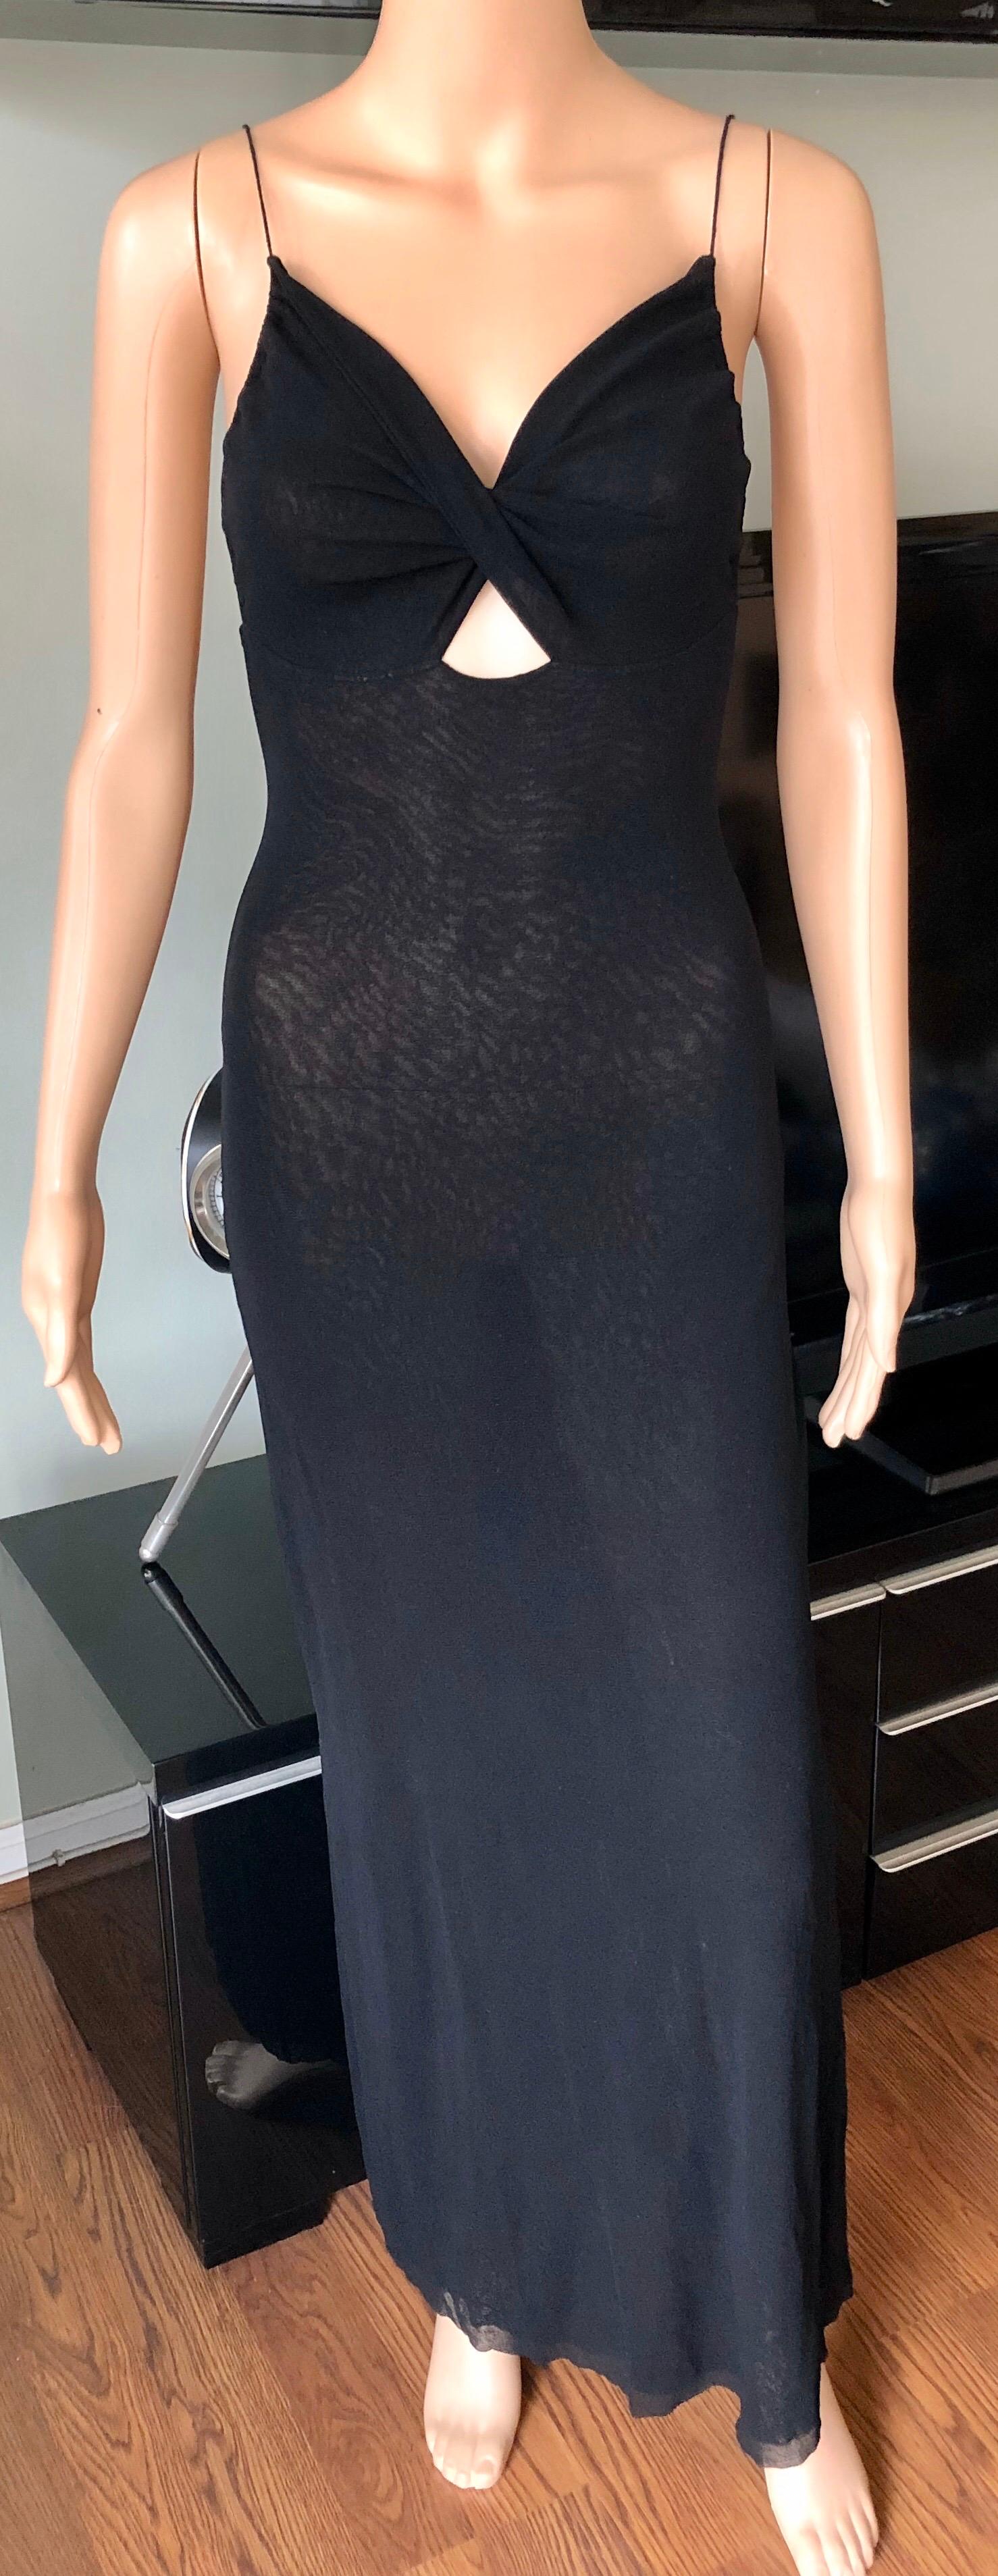 Jean Paul Gaultier Soleil S/S 1999 Cutout Semi-Sheer Mesh Black Maxi Dress In Excellent Condition For Sale In Naples, FL